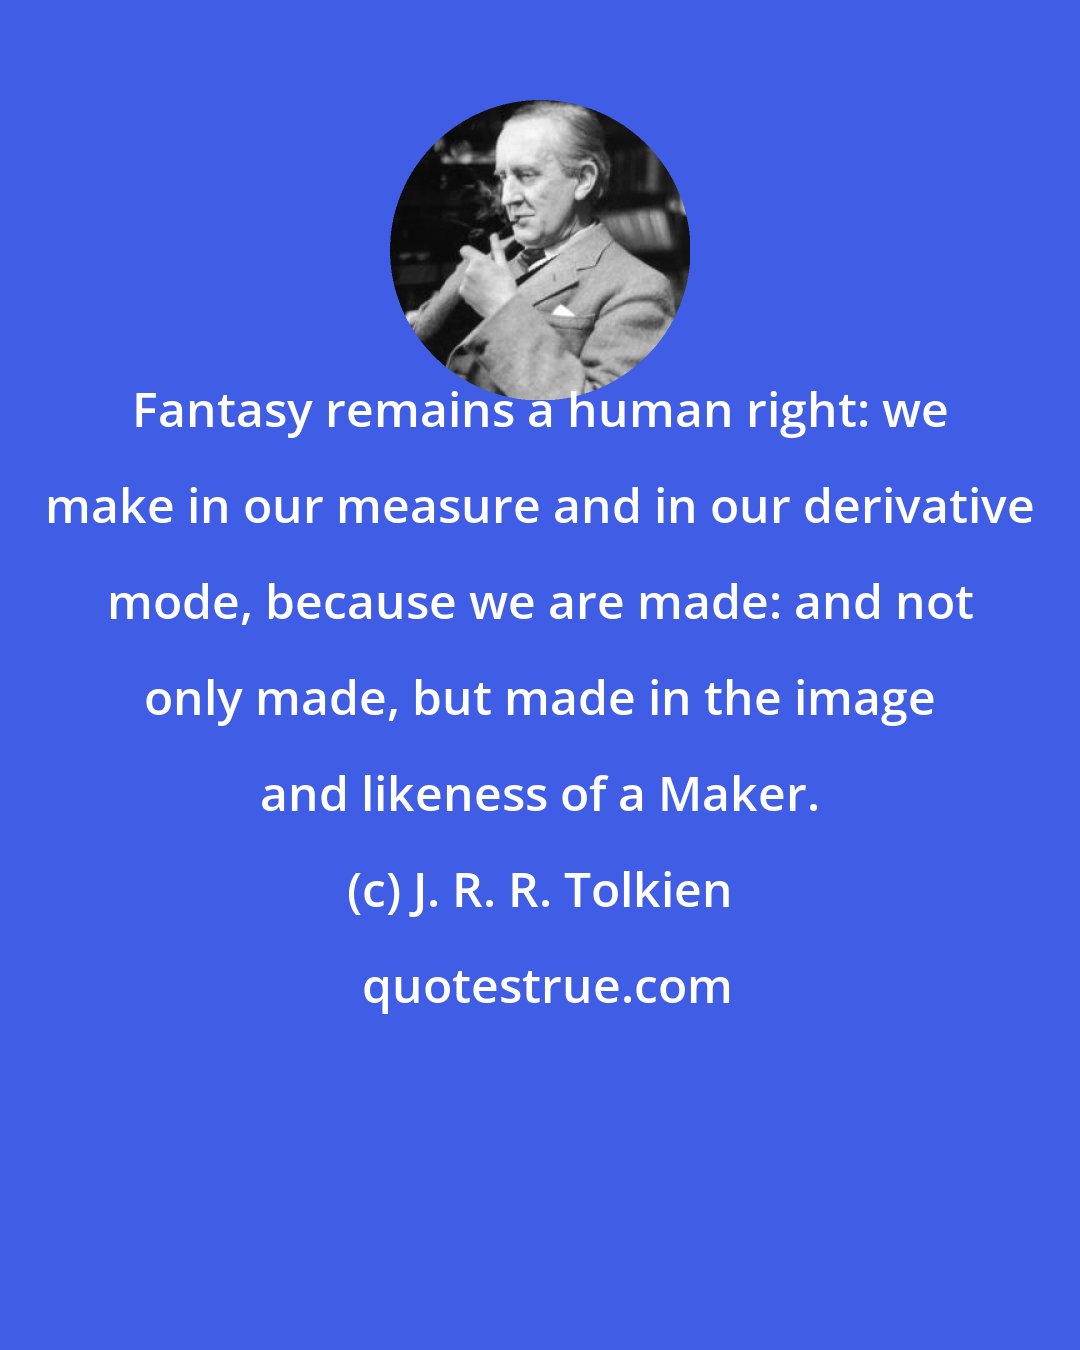 J. R. R. Tolkien: Fantasy remains a human right: we make in our measure and in our derivative mode, because we are made: and not only made, but made in the image and likeness of a Maker.